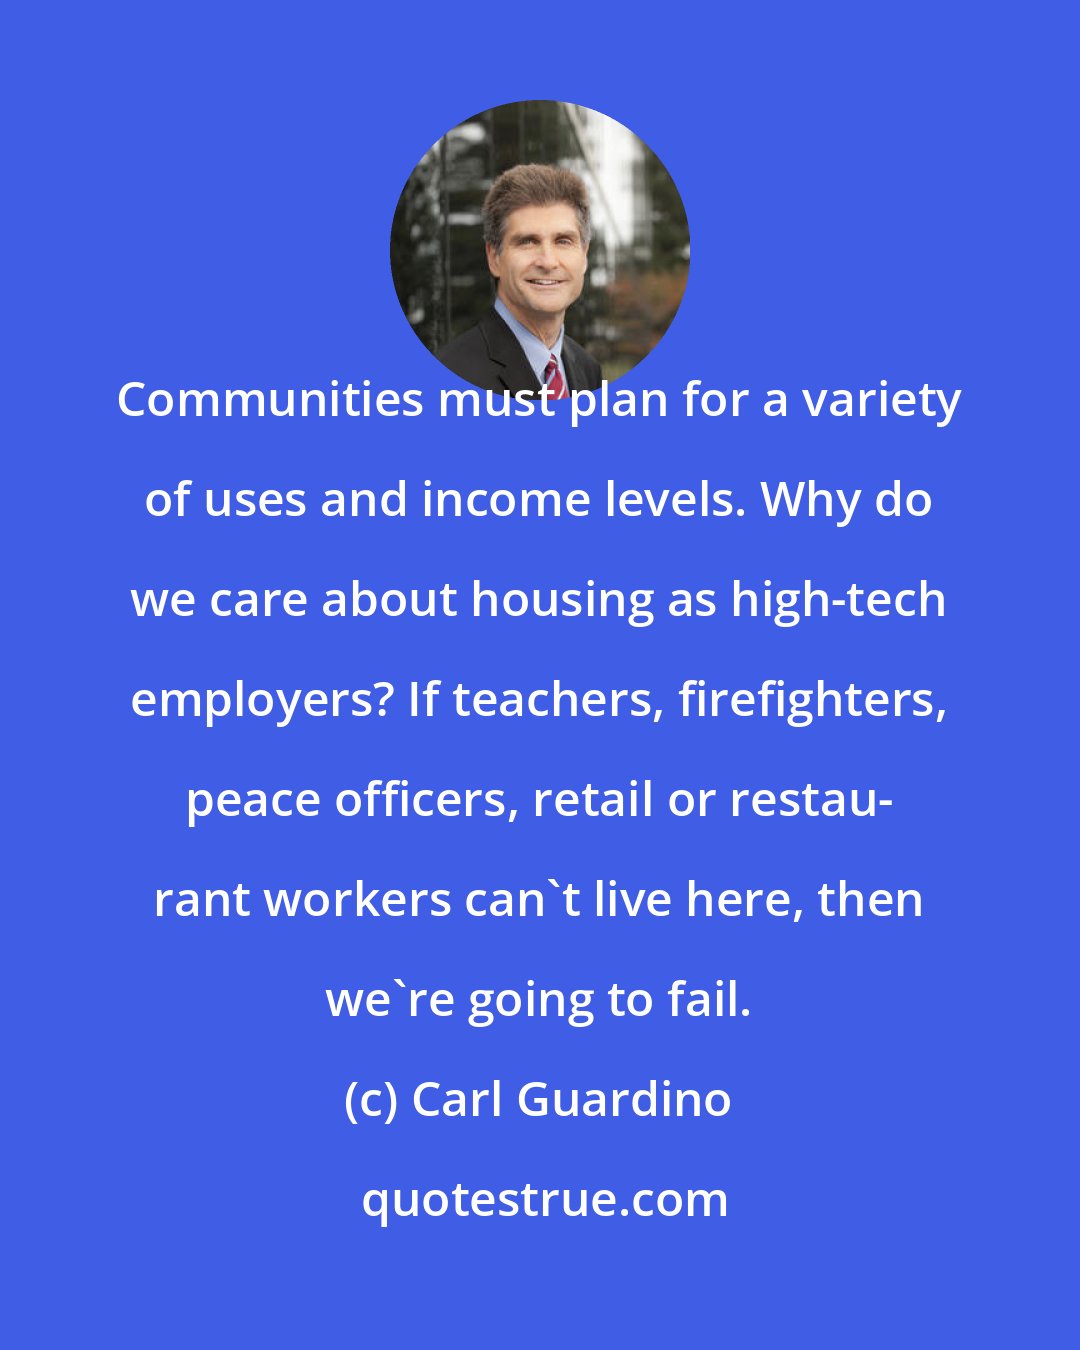 Carl Guardino: Communities must plan for a variety of uses and income levels. Why do we care about housing as high-tech employers? If teachers, firefighters, peace officers, retail or restau- rant workers can't live here, then we're going to fail.